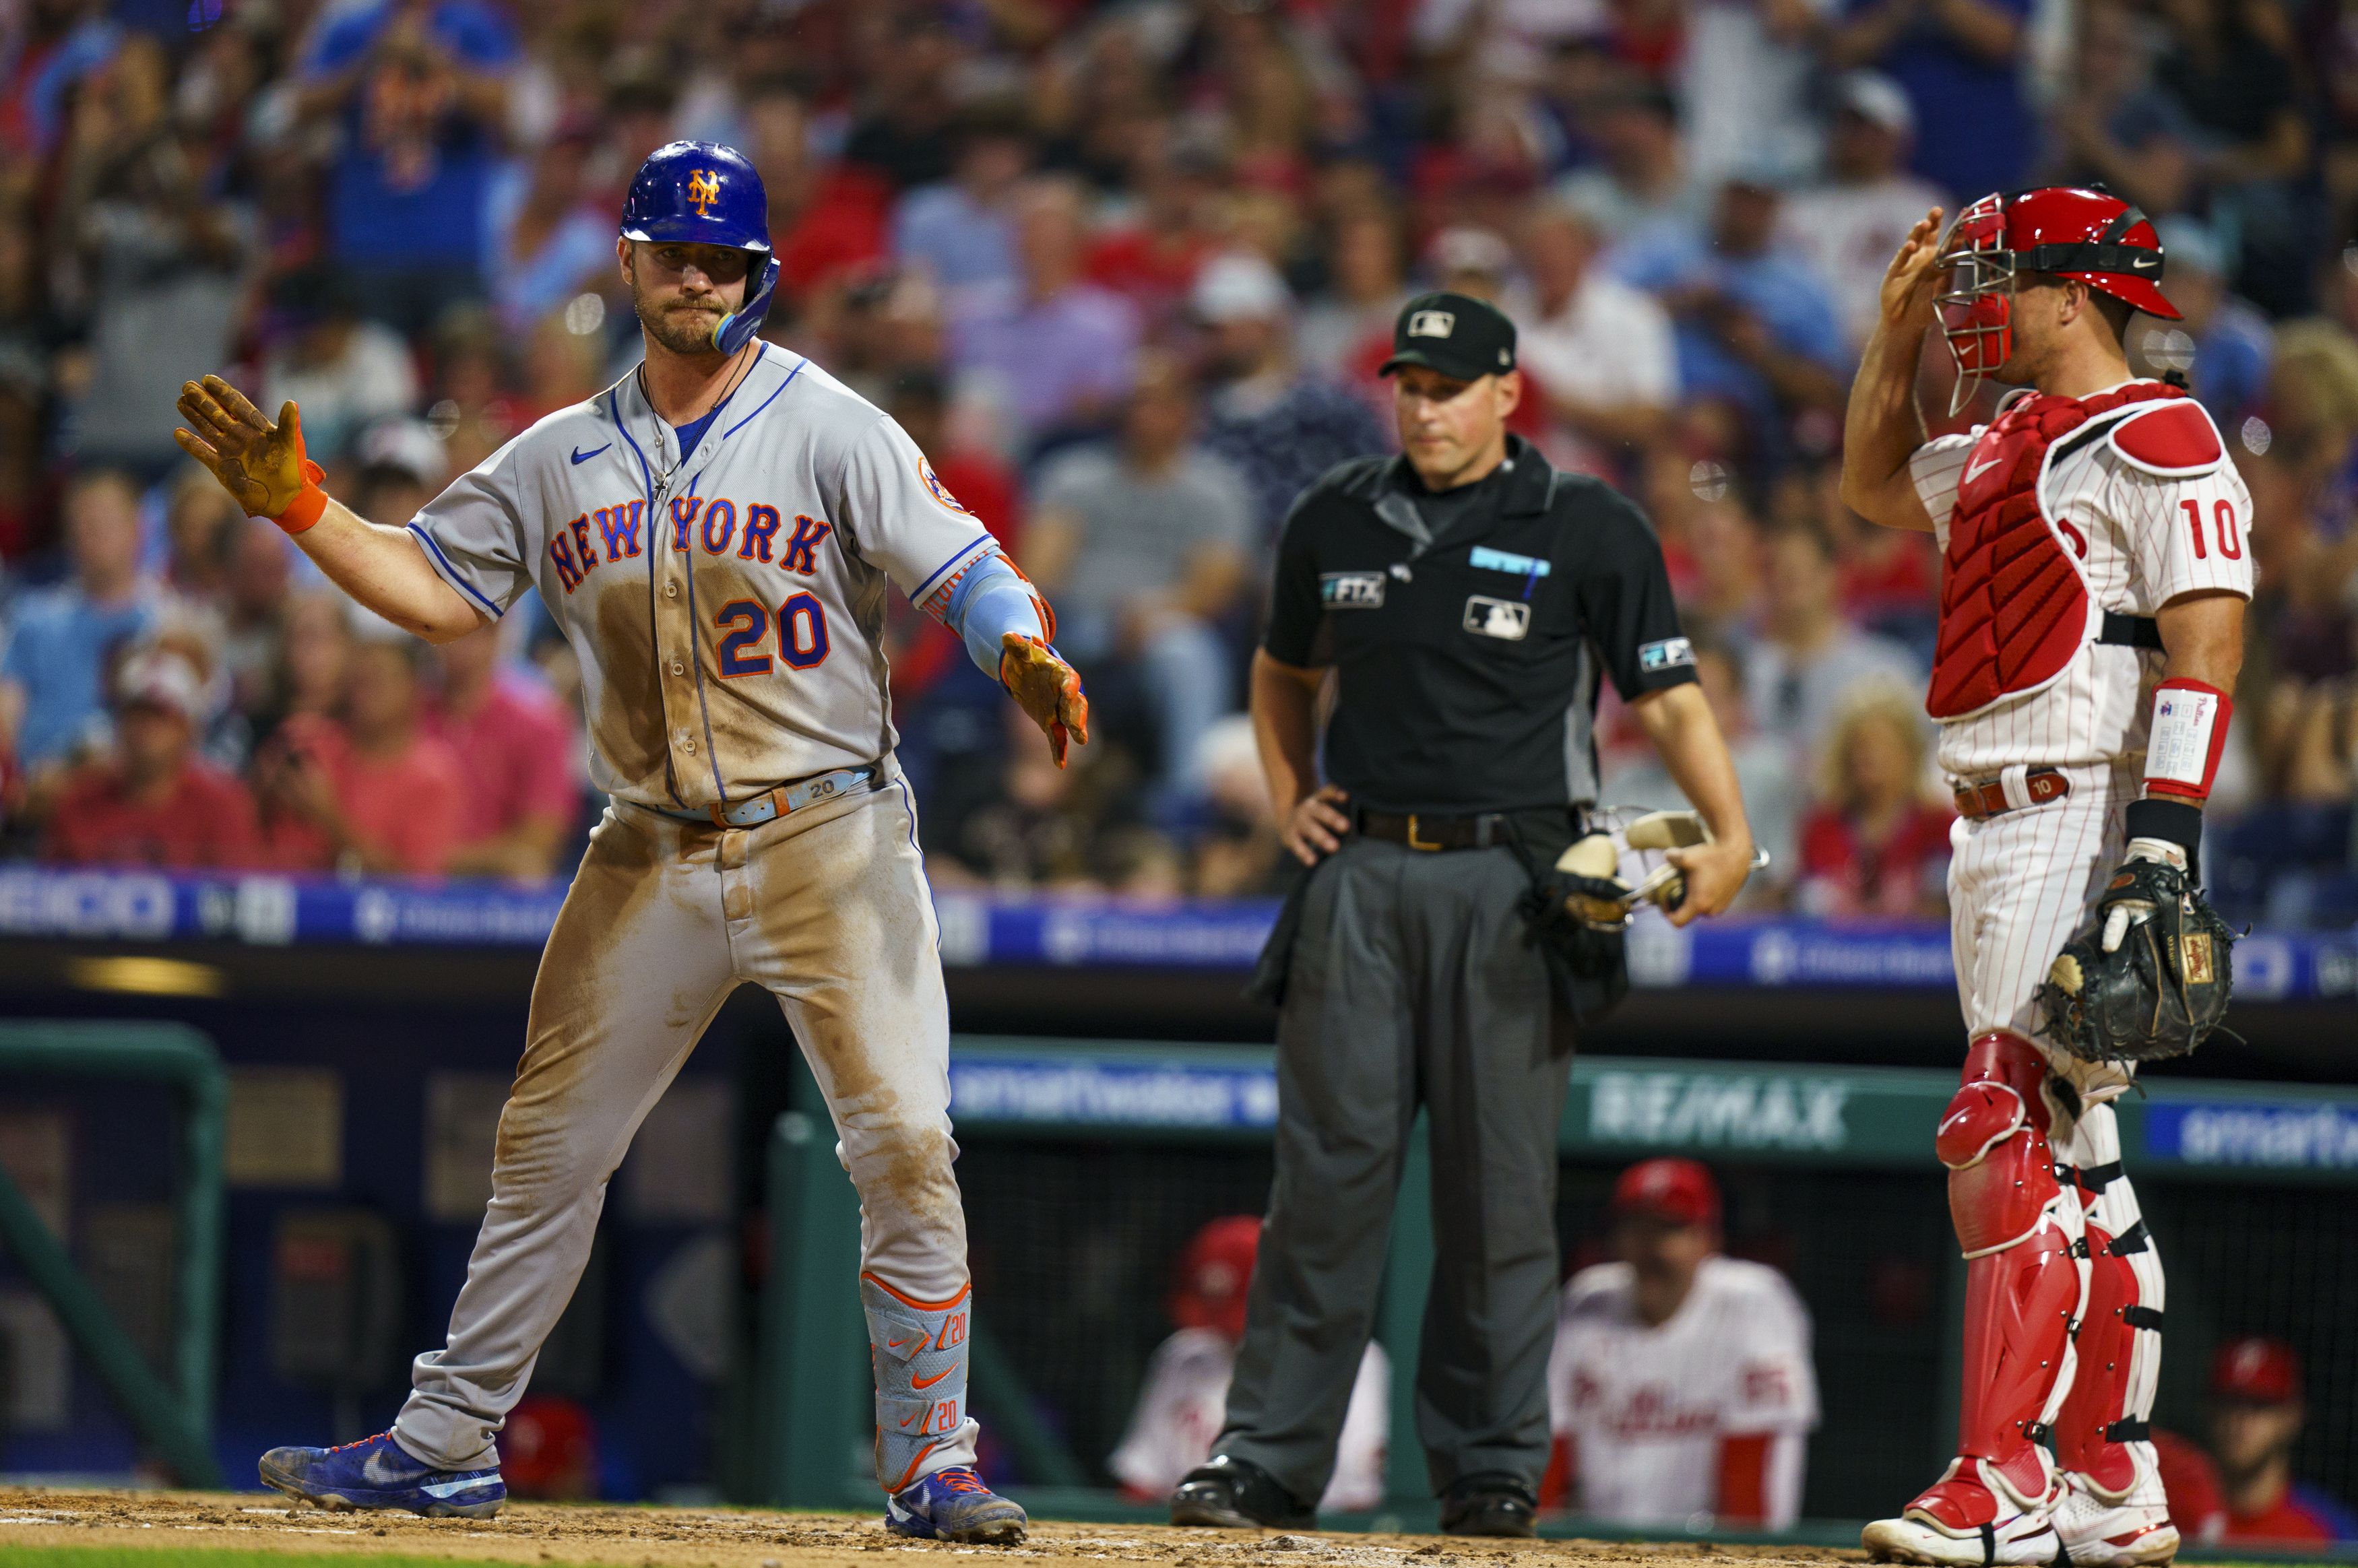 NY Mets: Pete Alonso joins Mike Piazza with fourth 30 HR season